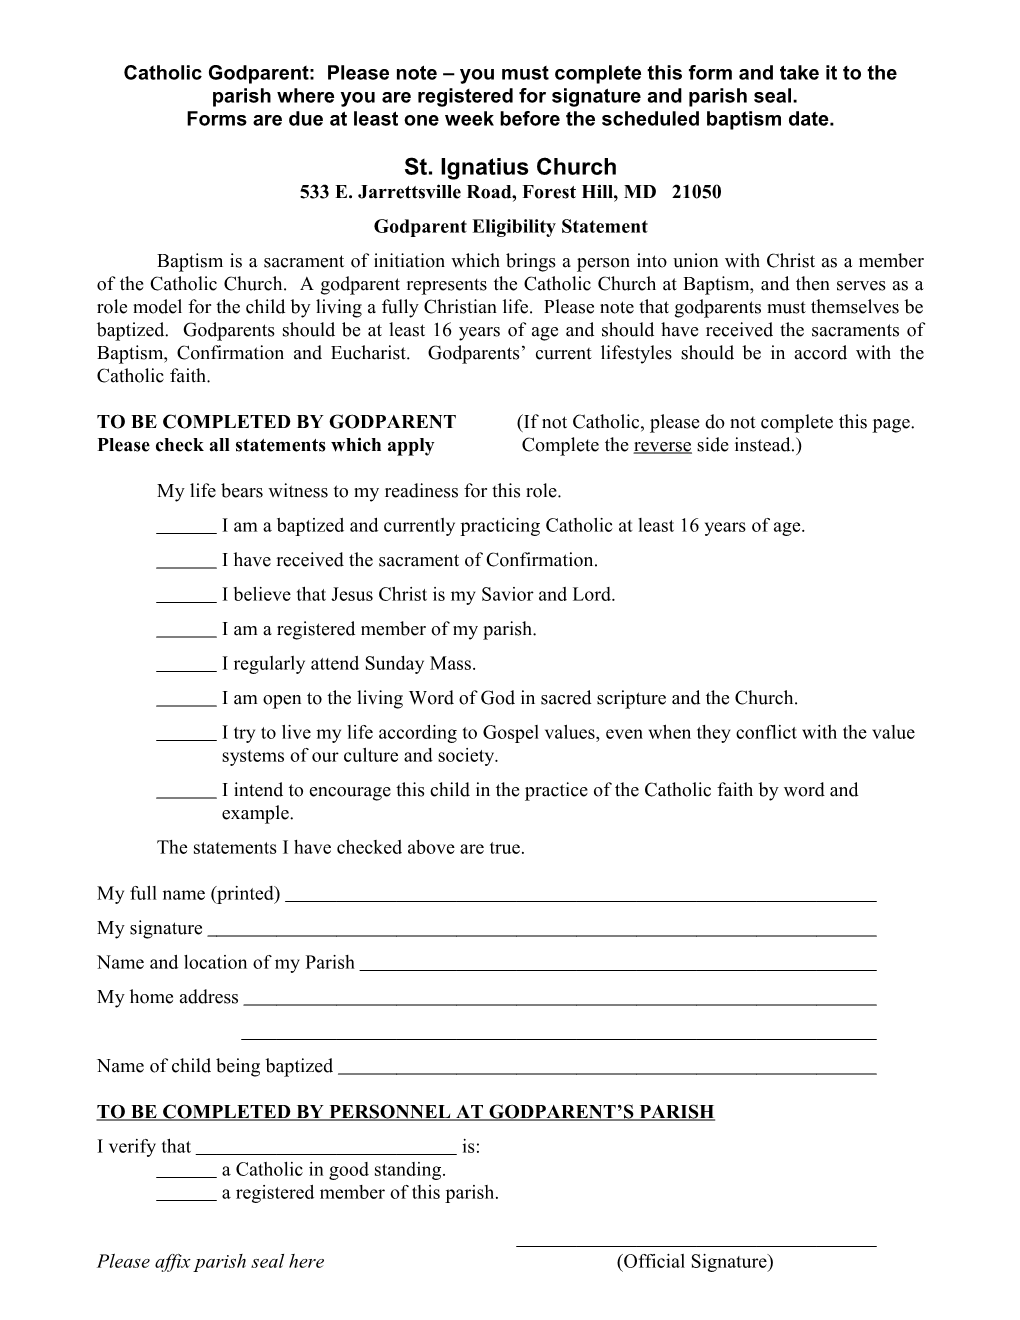 Forms Are Due at Least One Week Before the Scheduled Baptism Date